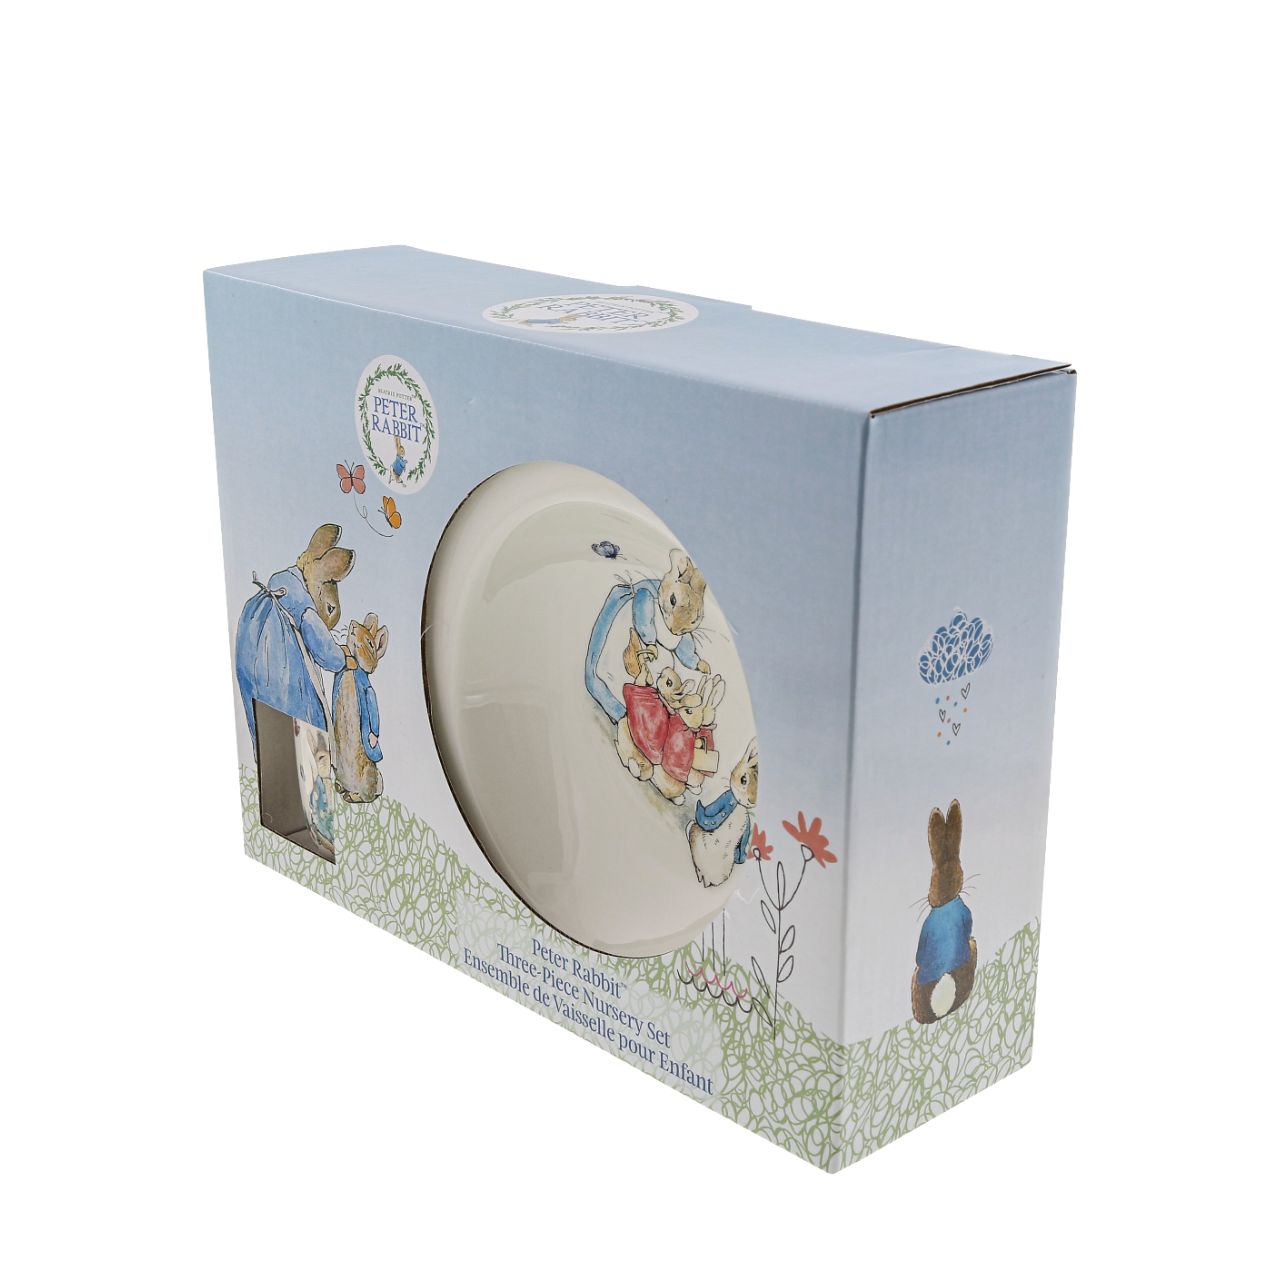 Beatrix Potter Peter Rabbit Three-Piece Nursery Set  This beautiful Peter Rabbit three-piece nursery set would make perfect for christening gifts, gifts for children or even a lovely birthday gift for a small child. Parents will be over the moon with such a unique gift.